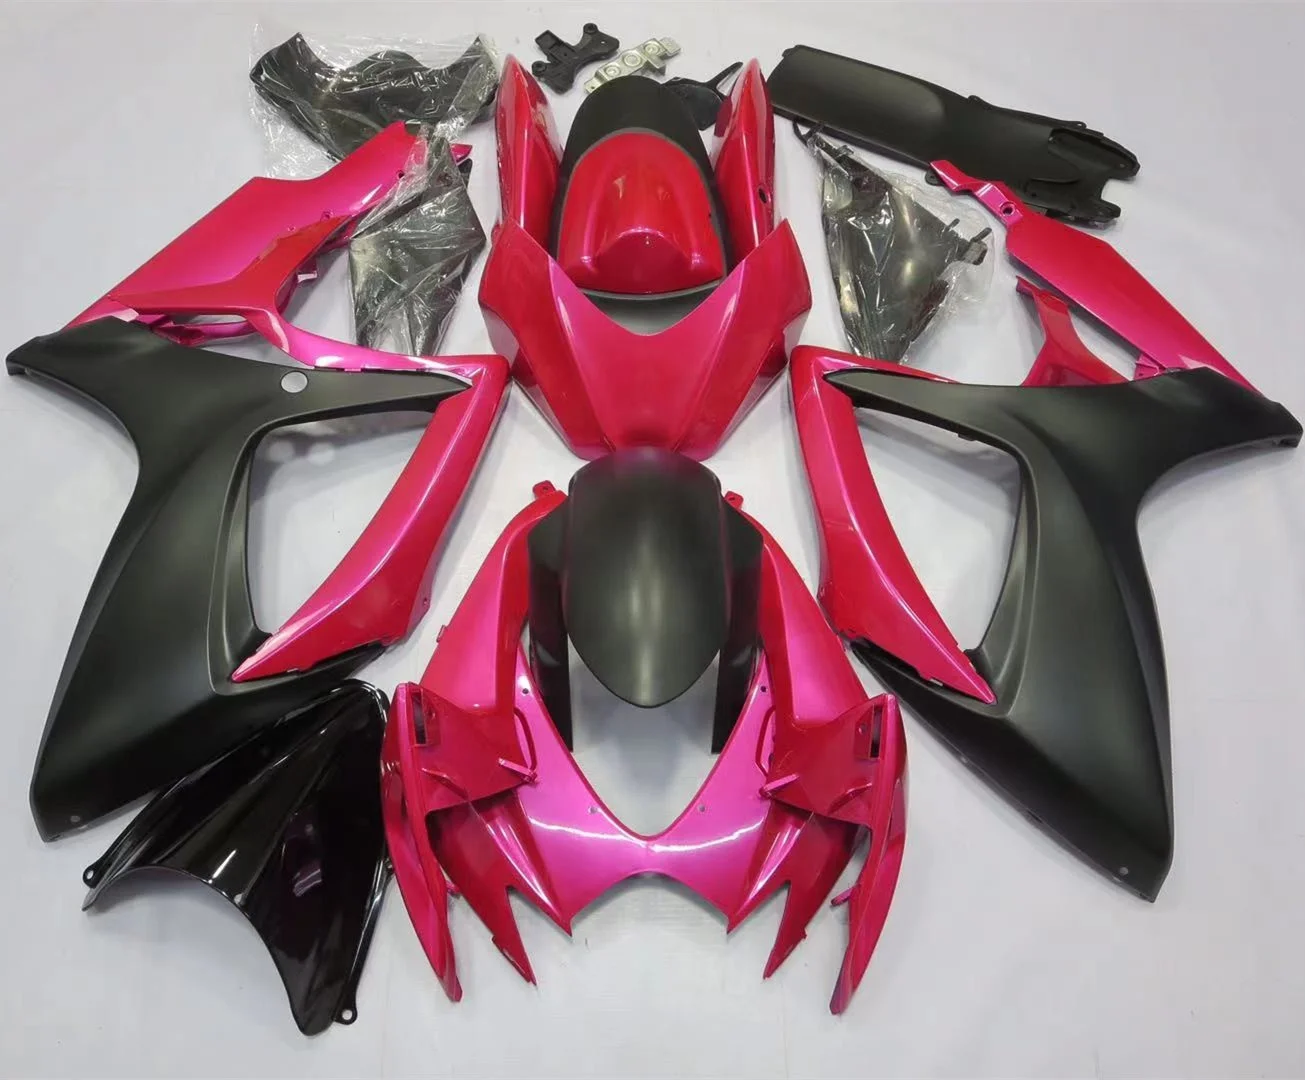 

2022 WHSC Motorcycle Fairing Fit For SUZUKI GSXR600-750 2006-2007 ABS Plastic Body Kits, Pictures shown